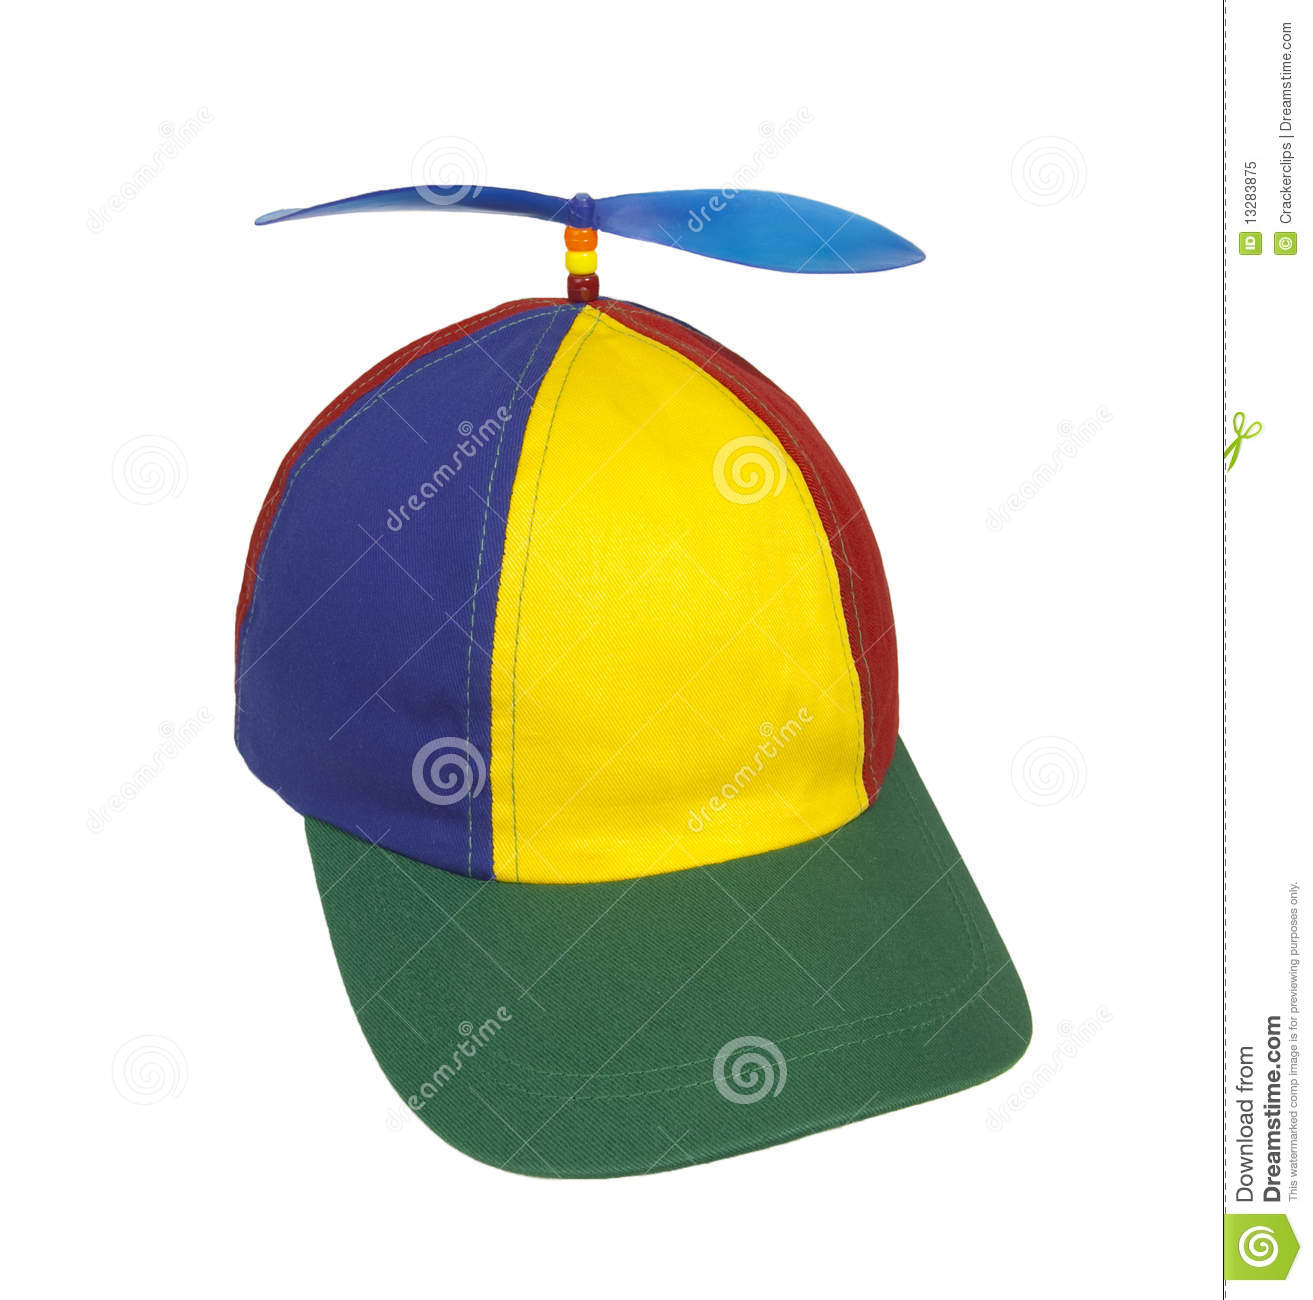 Hat With Propeller Royalty Free Stock Photo   Image  13283875